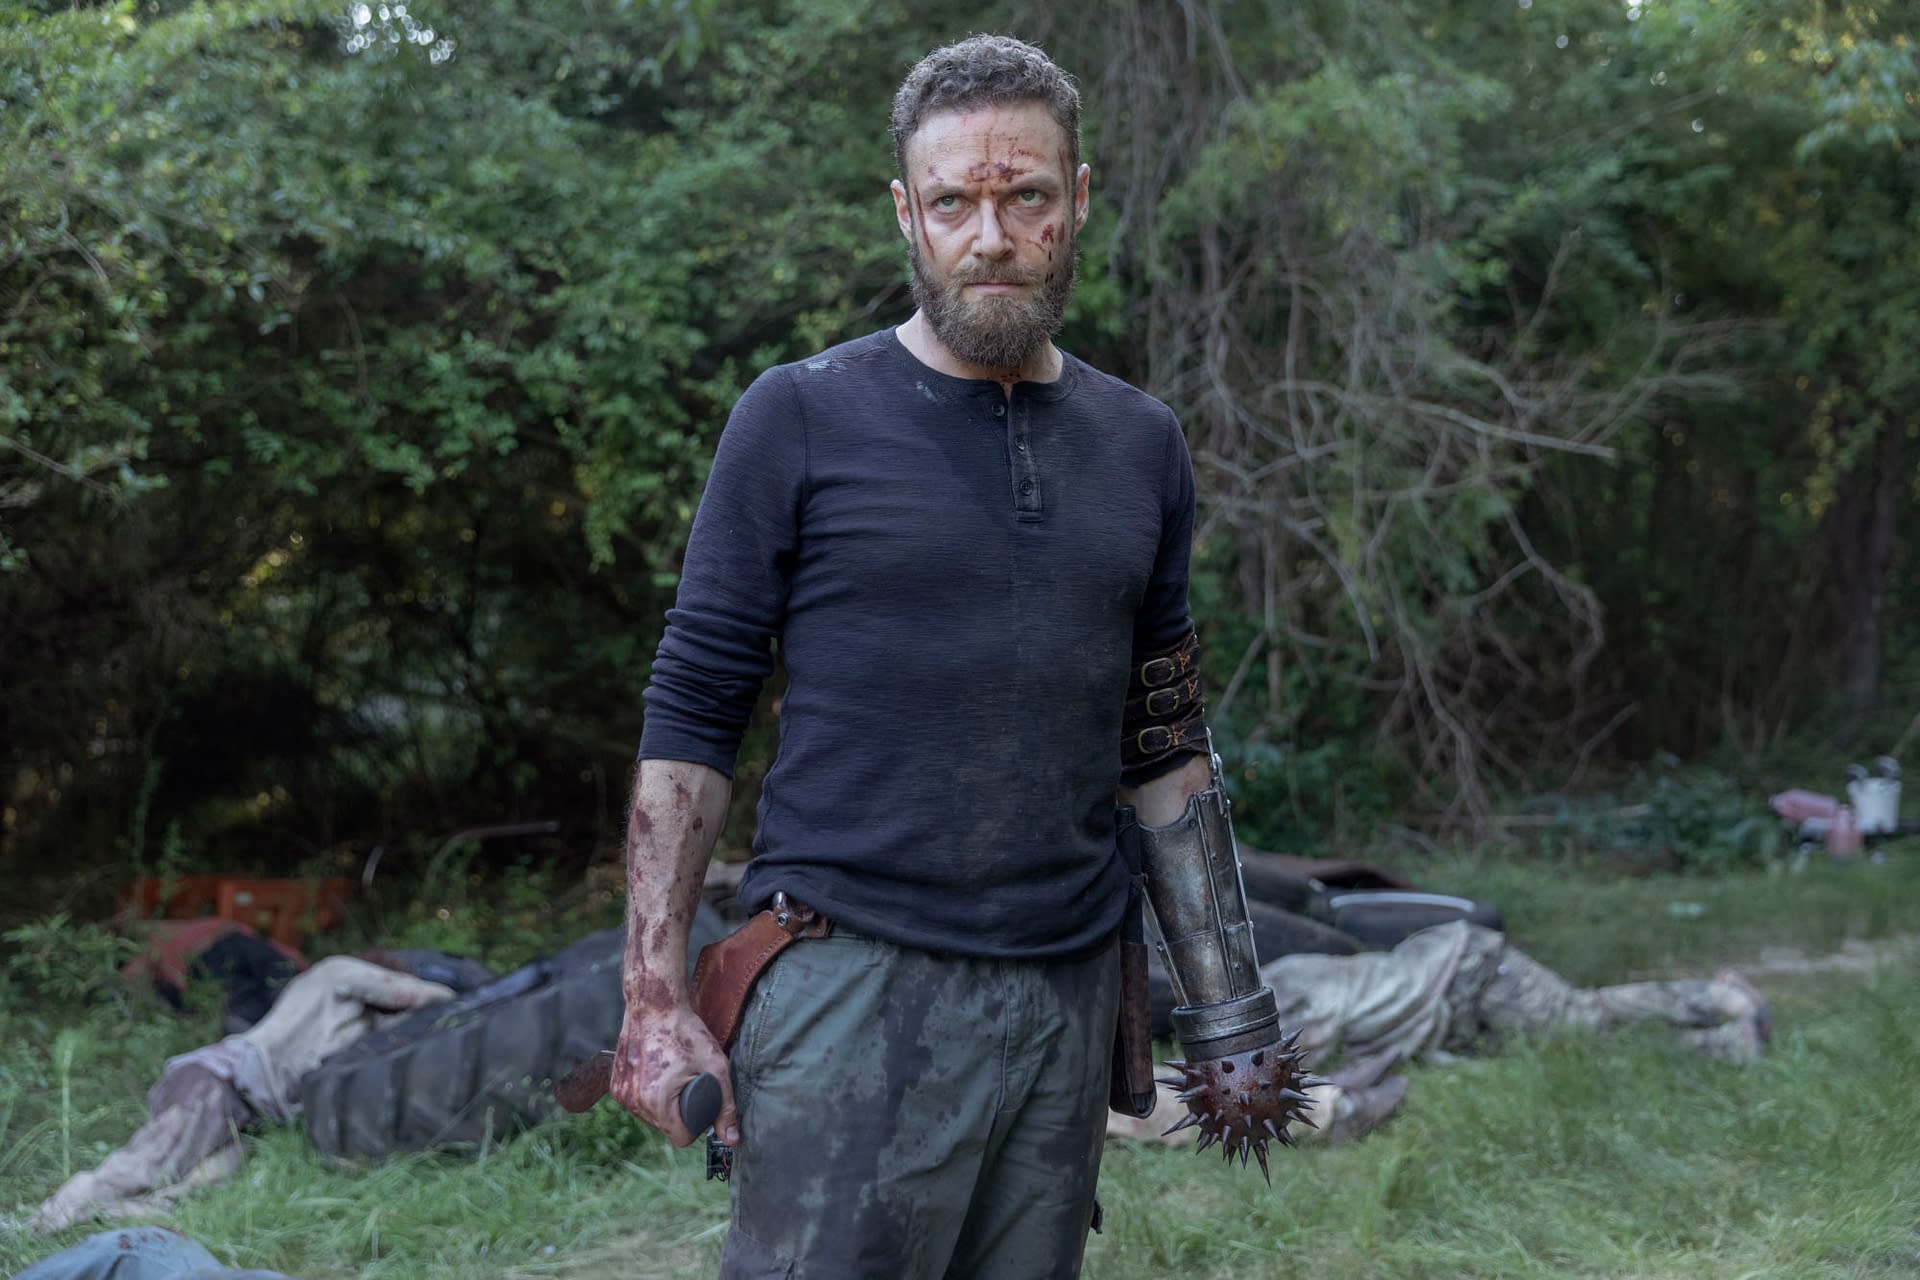 "The Walking Dead" Season 10 "Ghosts": Carol Takes Aim in Pulse-Pounding "Post-Zombie Apocalypse Political Thriller" [SPOILER REVIEW]